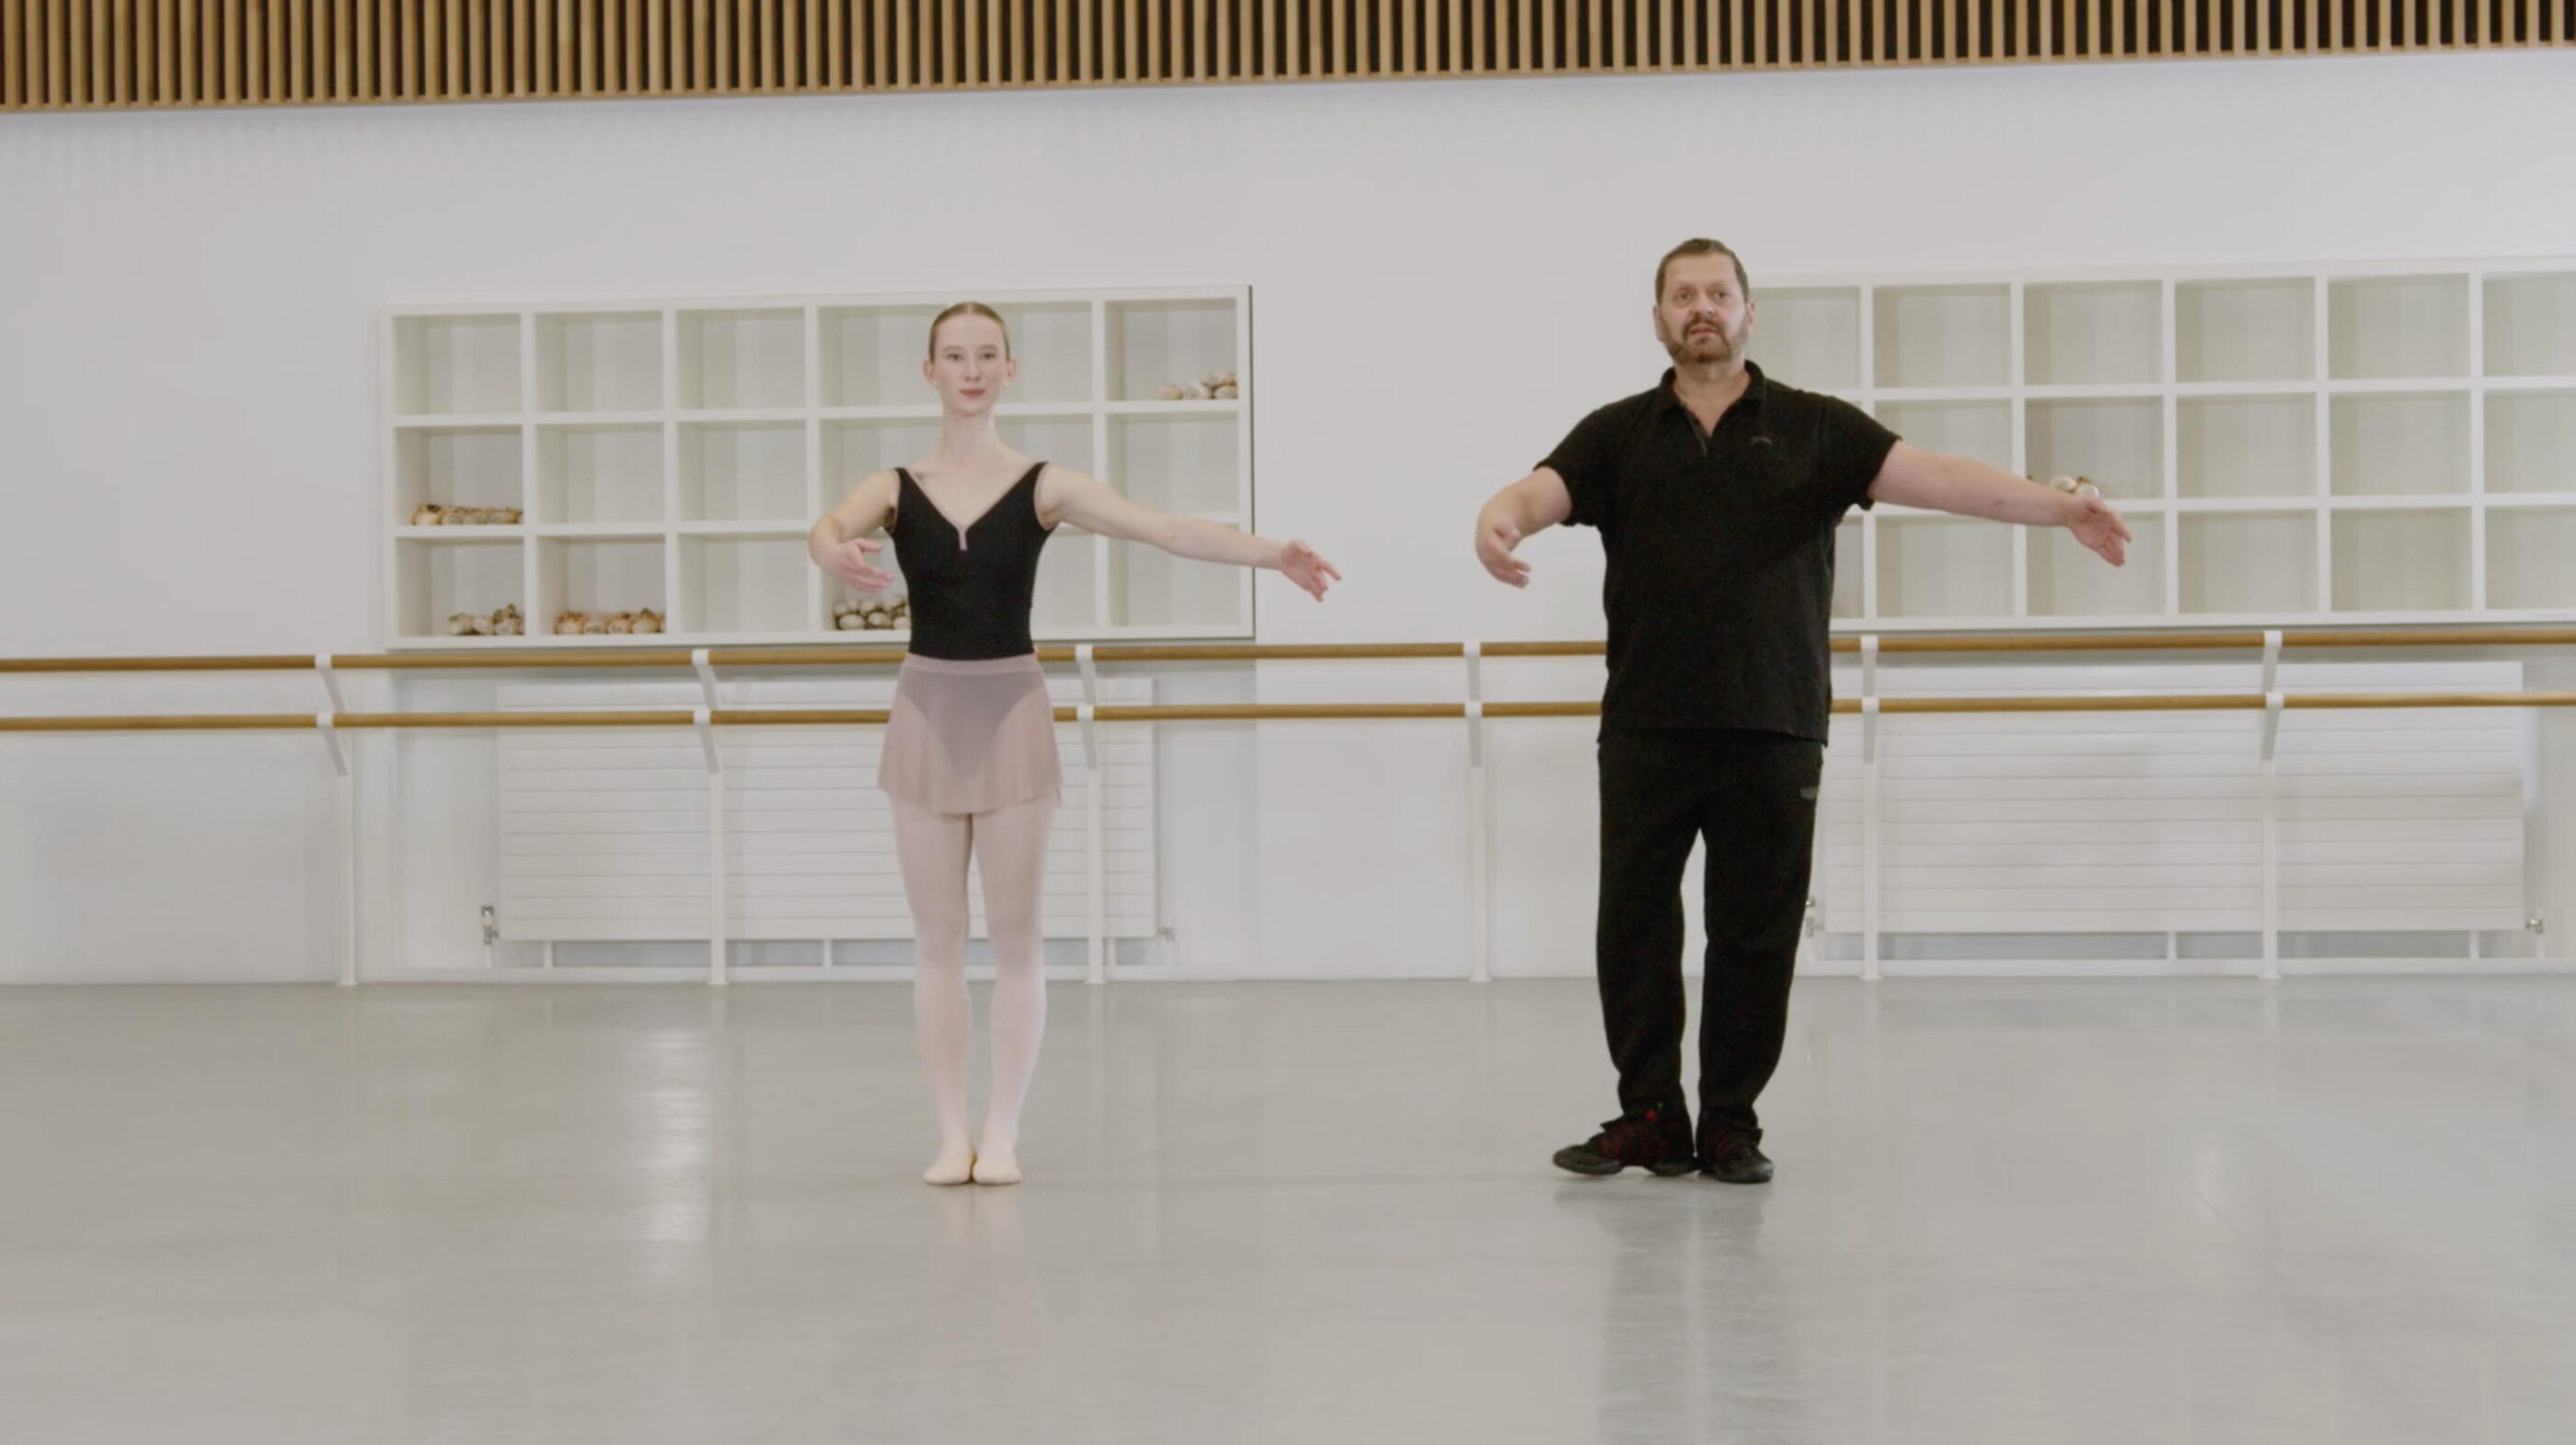 A ballet teacher and a demonstrator are showing the arms preparation for a turn. The teacher is wearing a black t-shirt and trousers. The demonstrator is wearing a black leotard and a pink skirt.